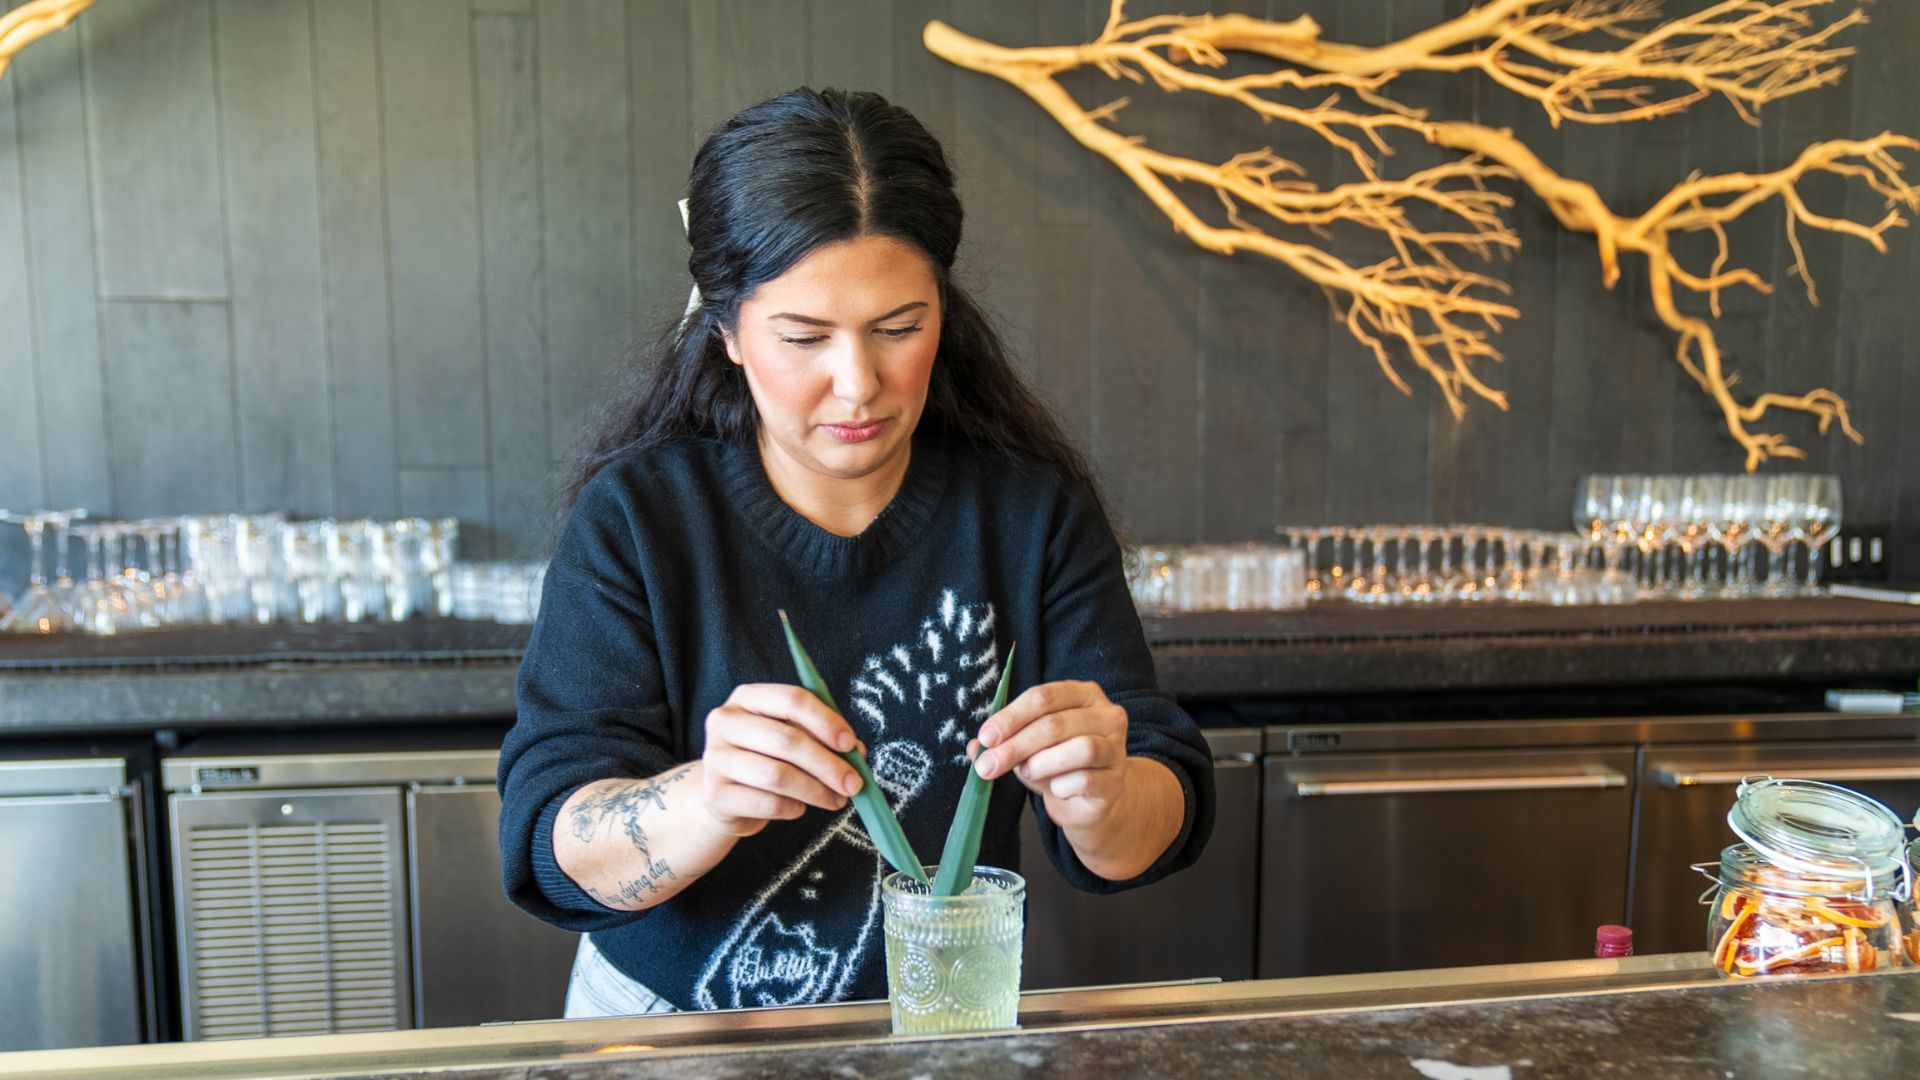 Bar director Leila Miller adds the finishing touches to a cocktail at Vicia.